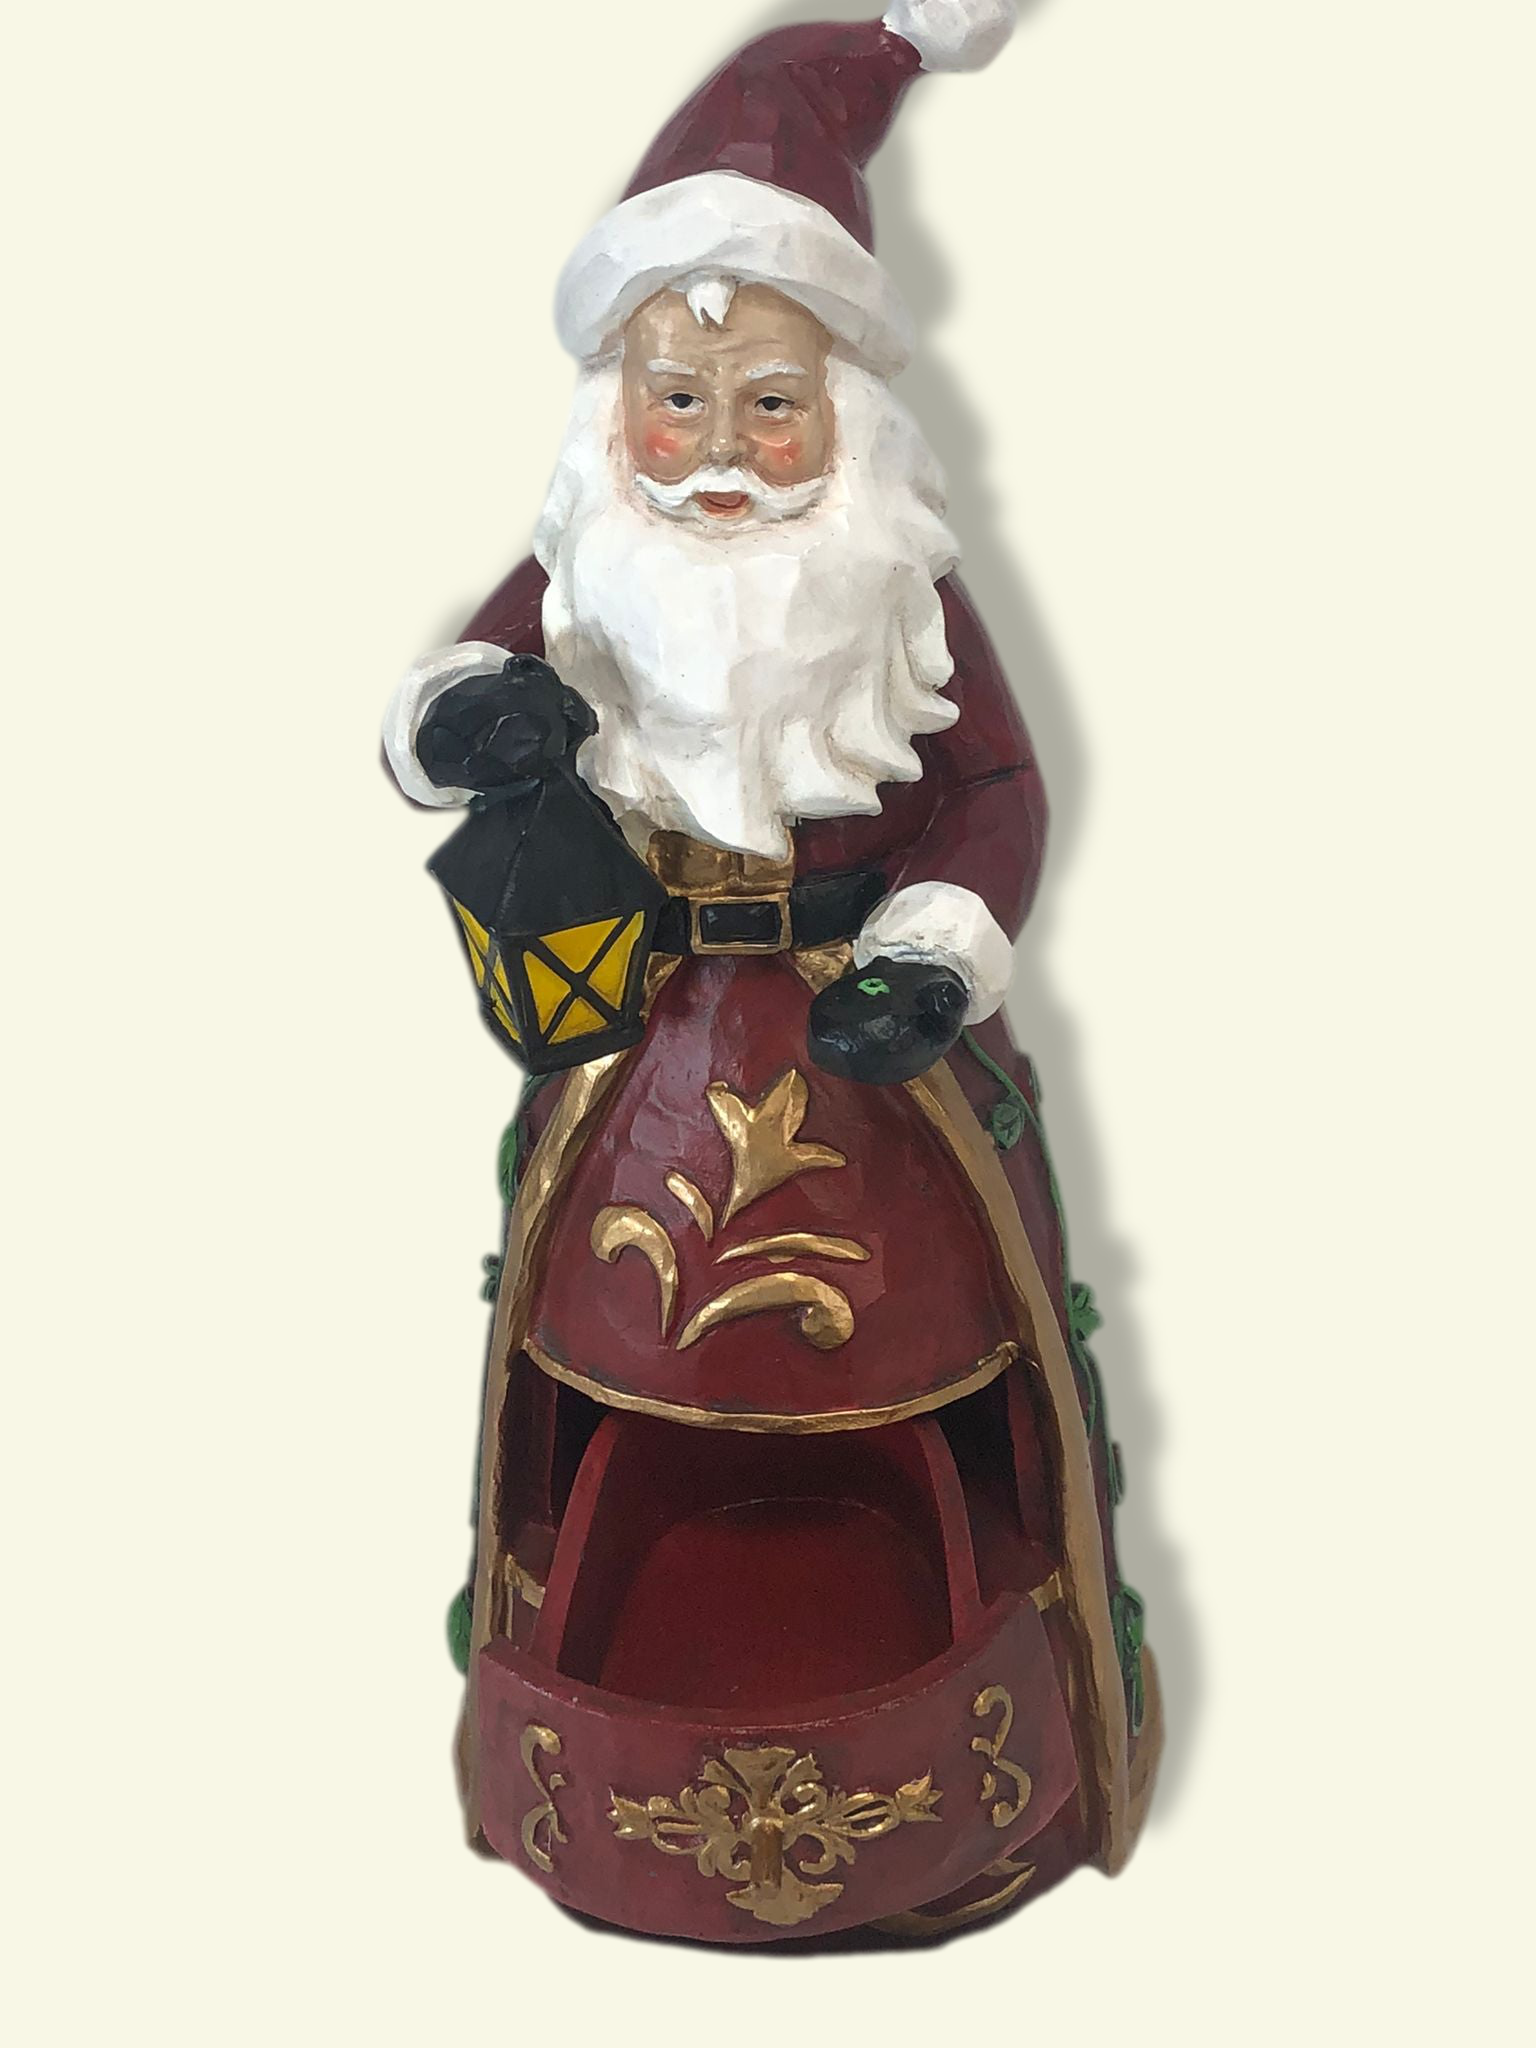 "As Is" Plow & Hearth Choice of Holiday Figurine with Hidden Drawer